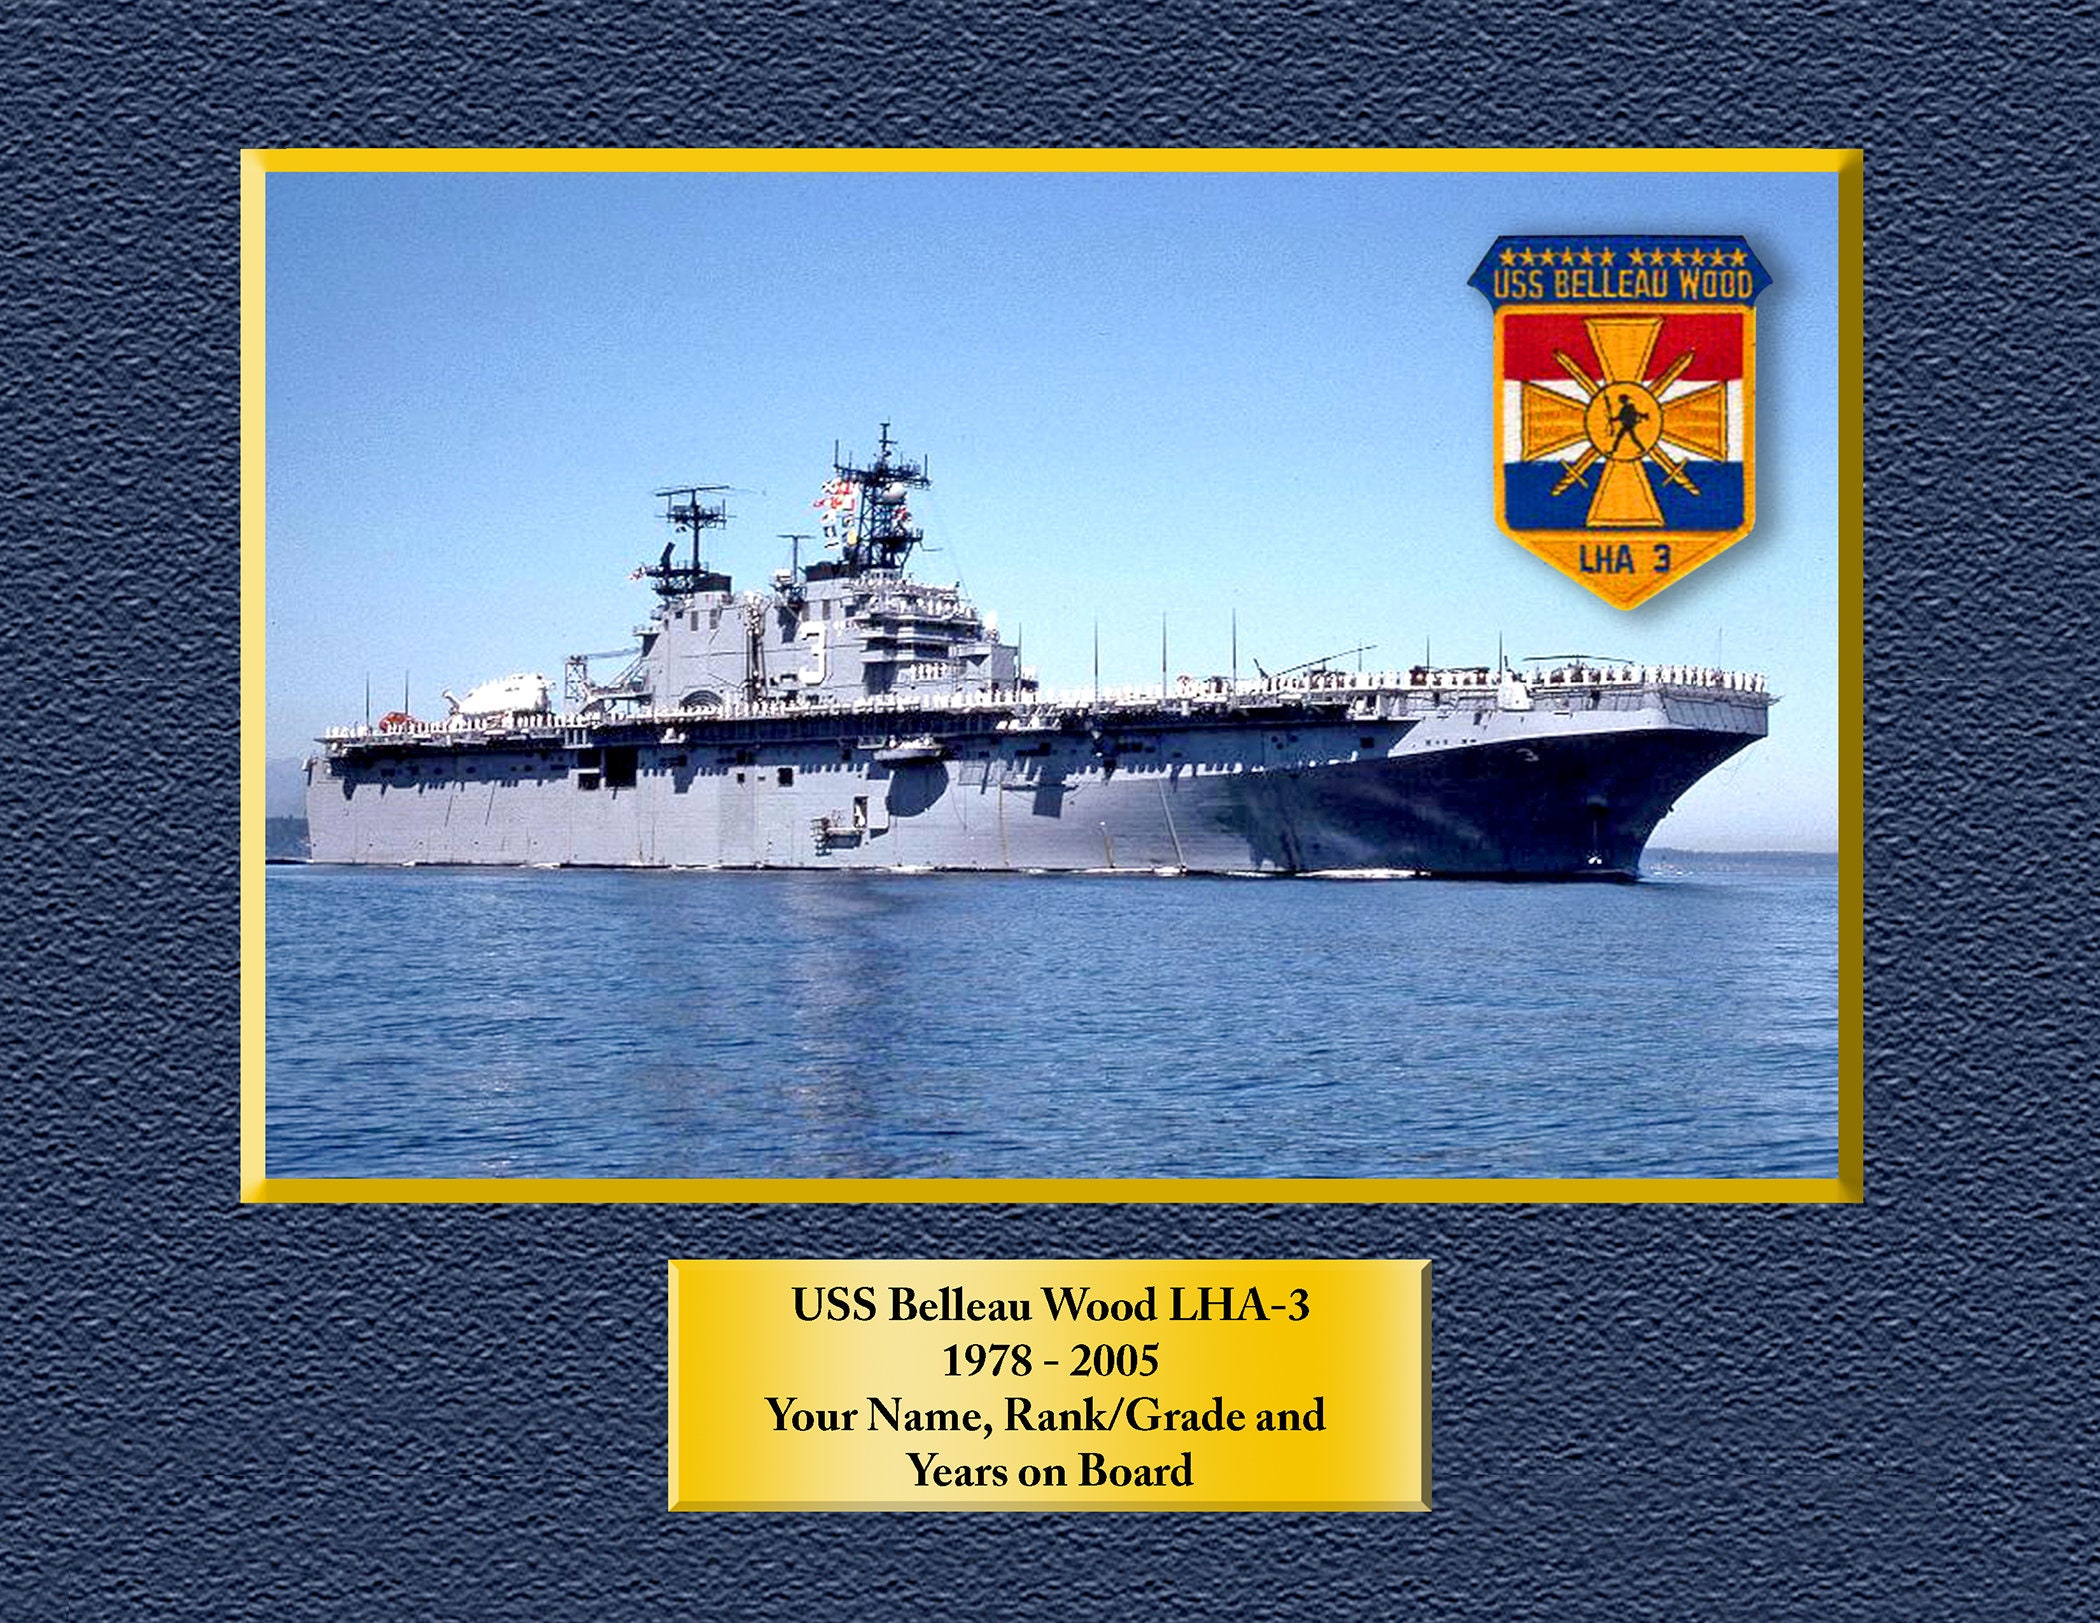 USS BELLEAU WOOD LHA 3 Decal US NAVY Military USN S01 